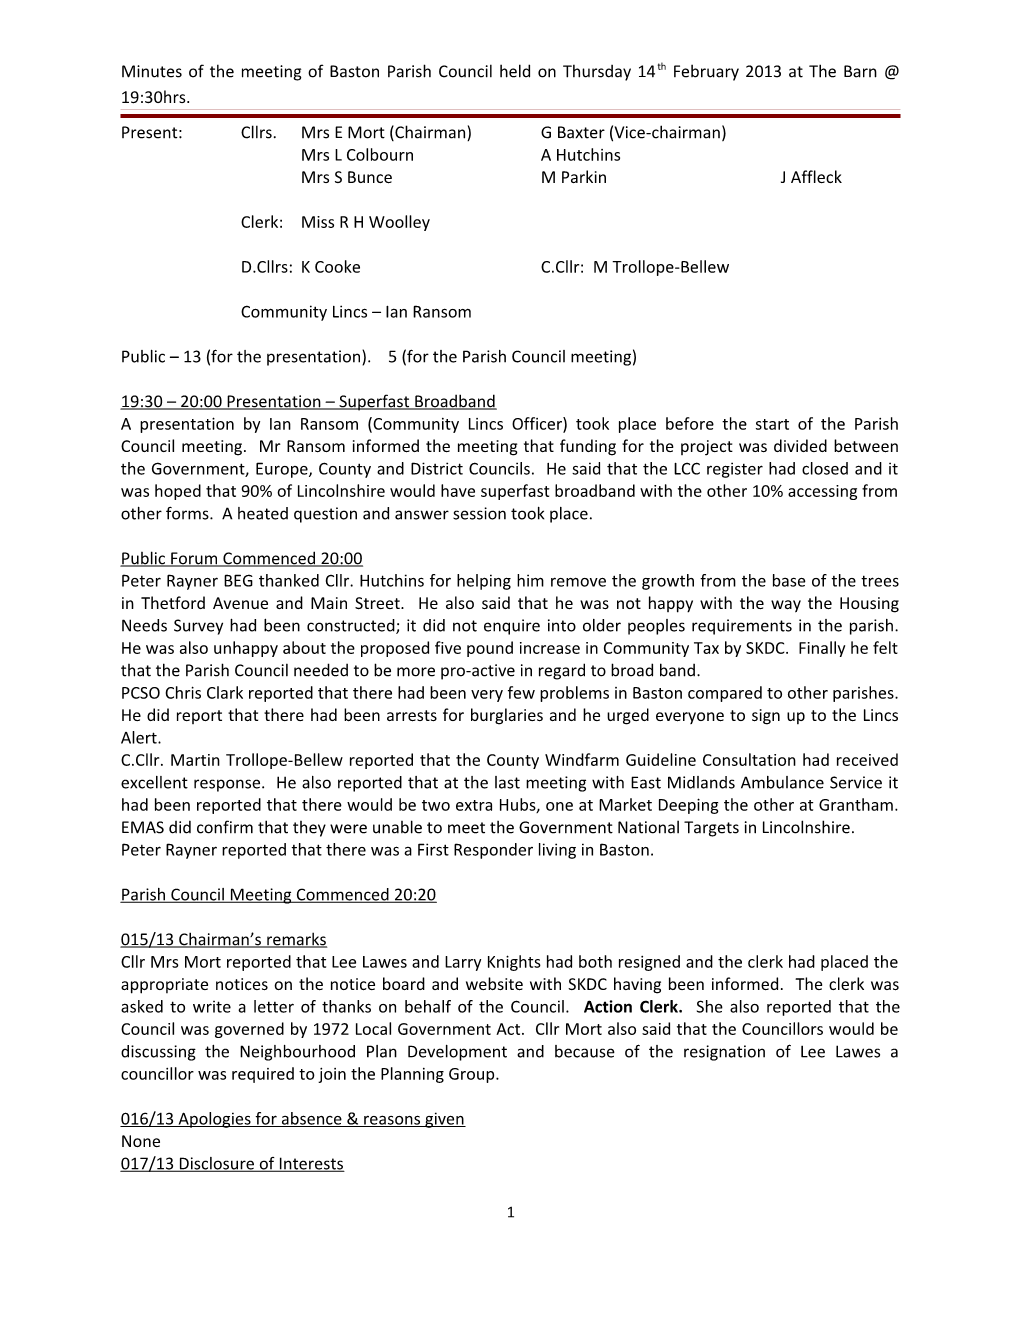 Clerks Notes of the Meeting of Baston Parish Council Held on Thursday 9Th September 2010 s1